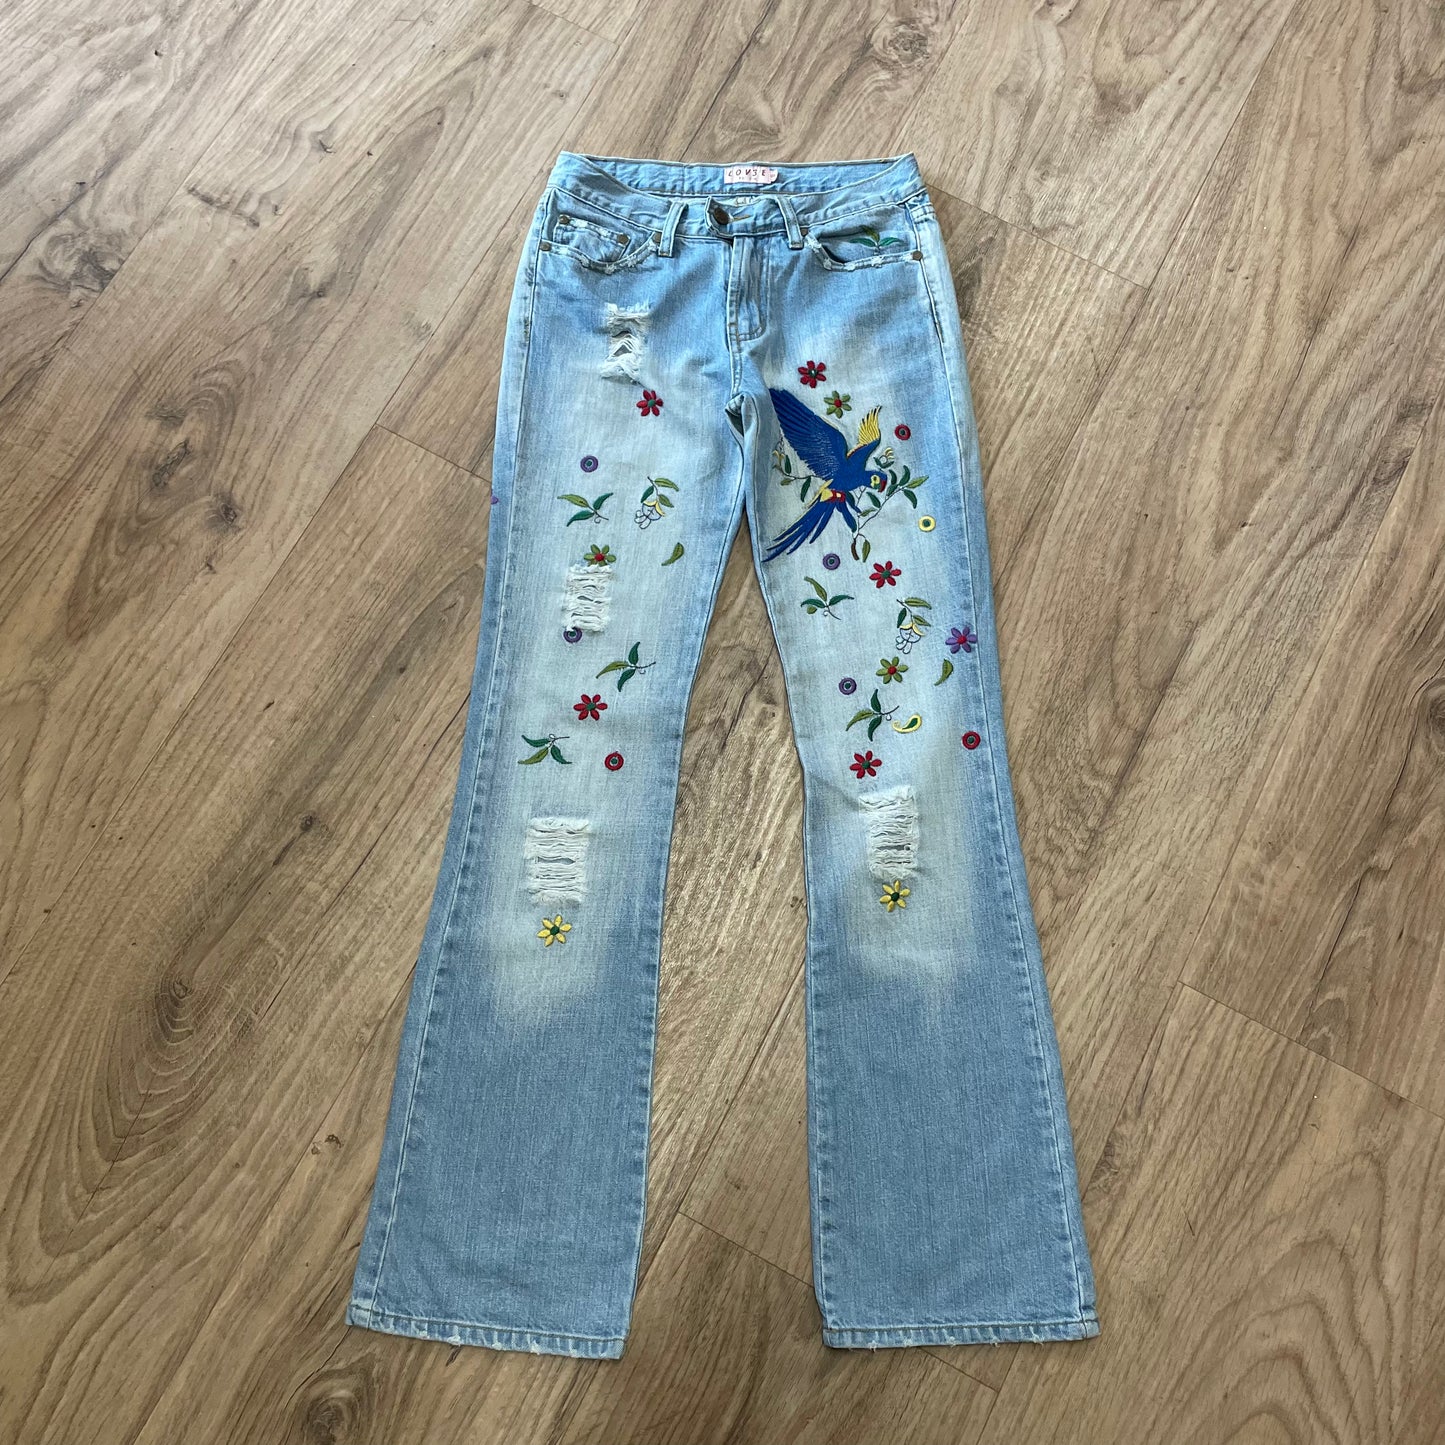 Denim embroidered two piece